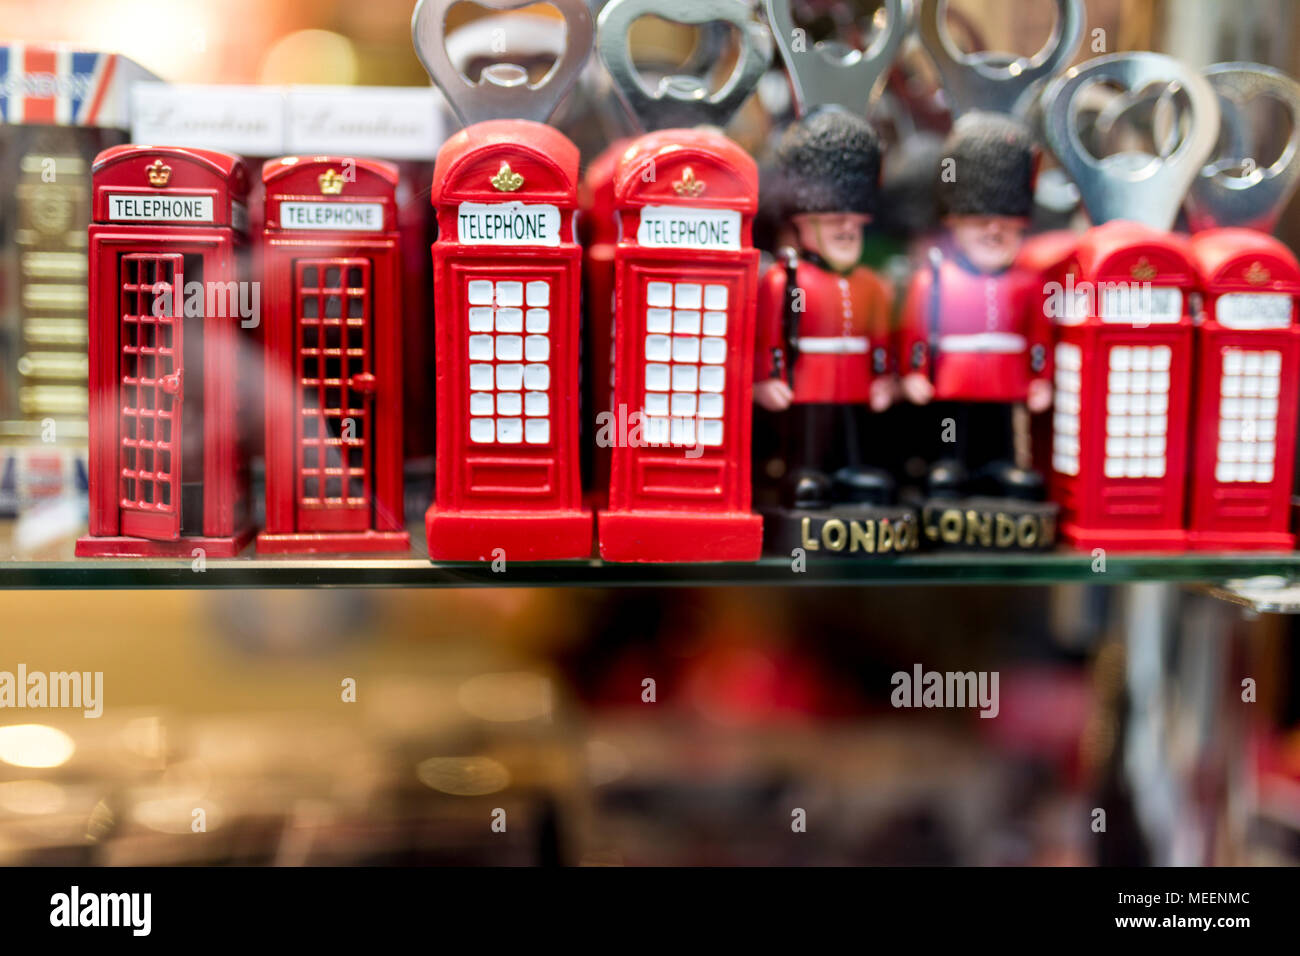 A London souvenir shop displaying British souvenirs including classic British red telephone boxes and beefeater and London Tower Guards bottle openers Stock Photo